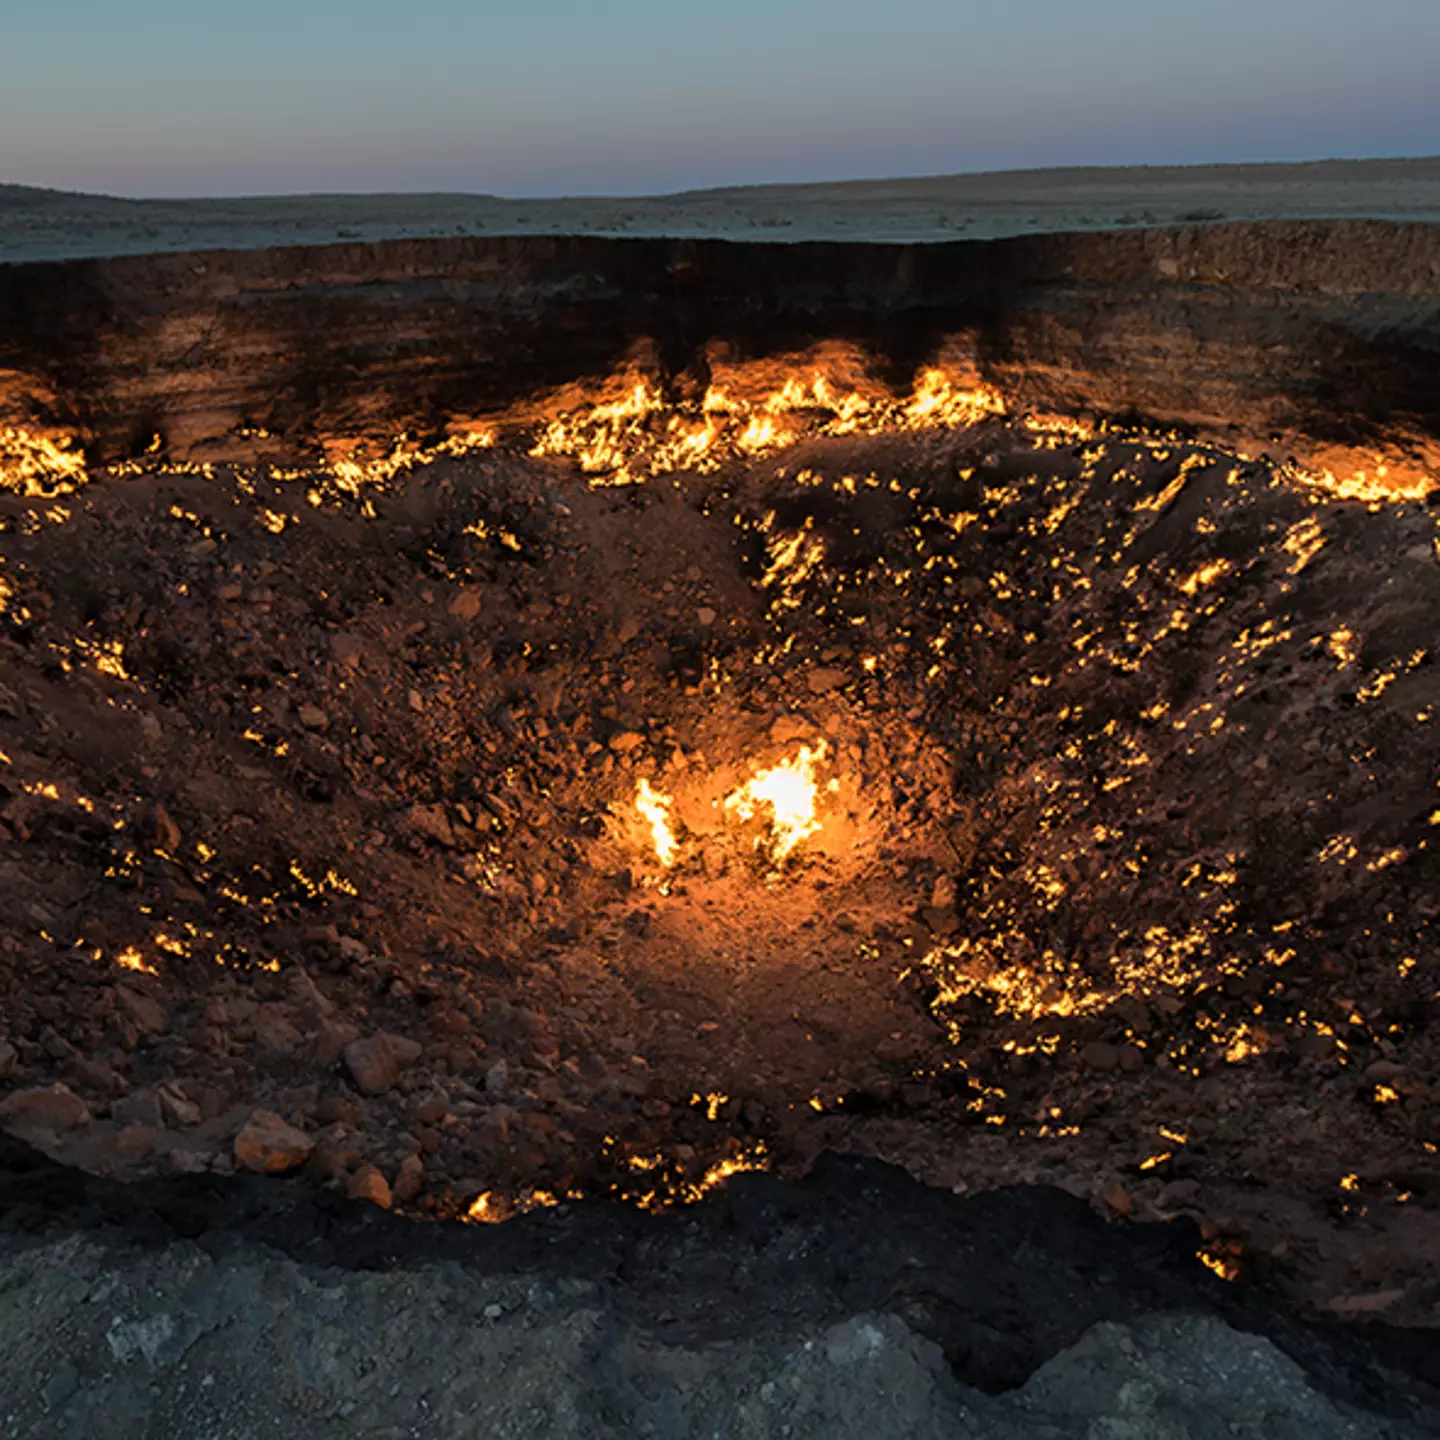 230ft-wide hole known as 'The Gates Of Hell' has been burning since 1971